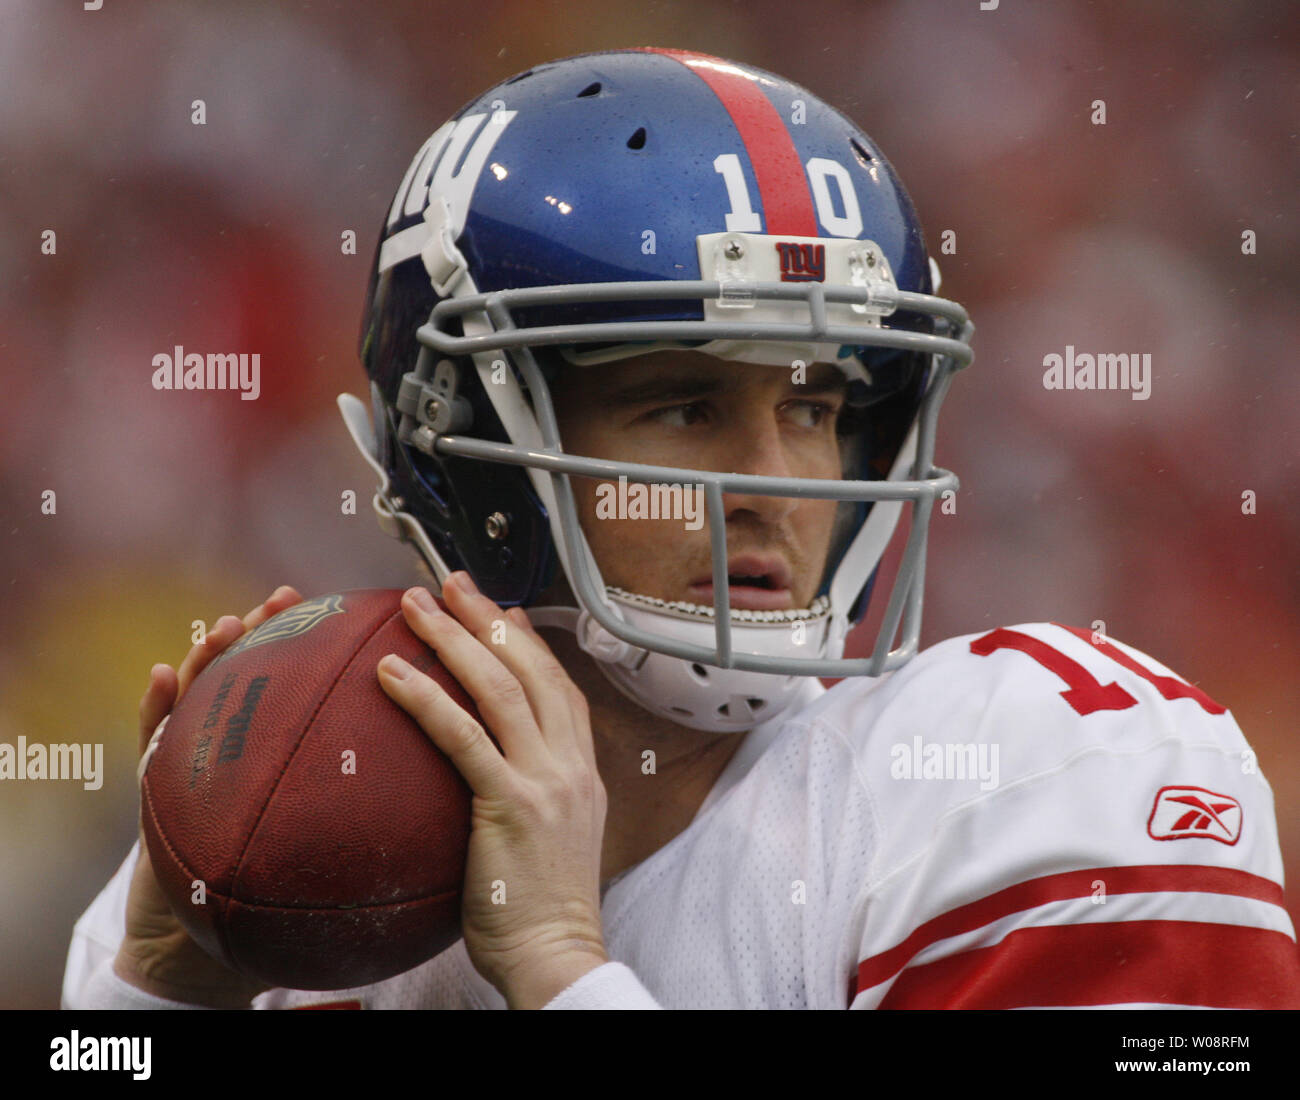 New York Giants QB Eli Manning (10) warms up for the  San Francisco 49ers in the NFC Championship at Candlestick Park in San Francisco on January 22, 2012. The Giants won 20-17.    UPI/Terry Schmitt Stock Photo